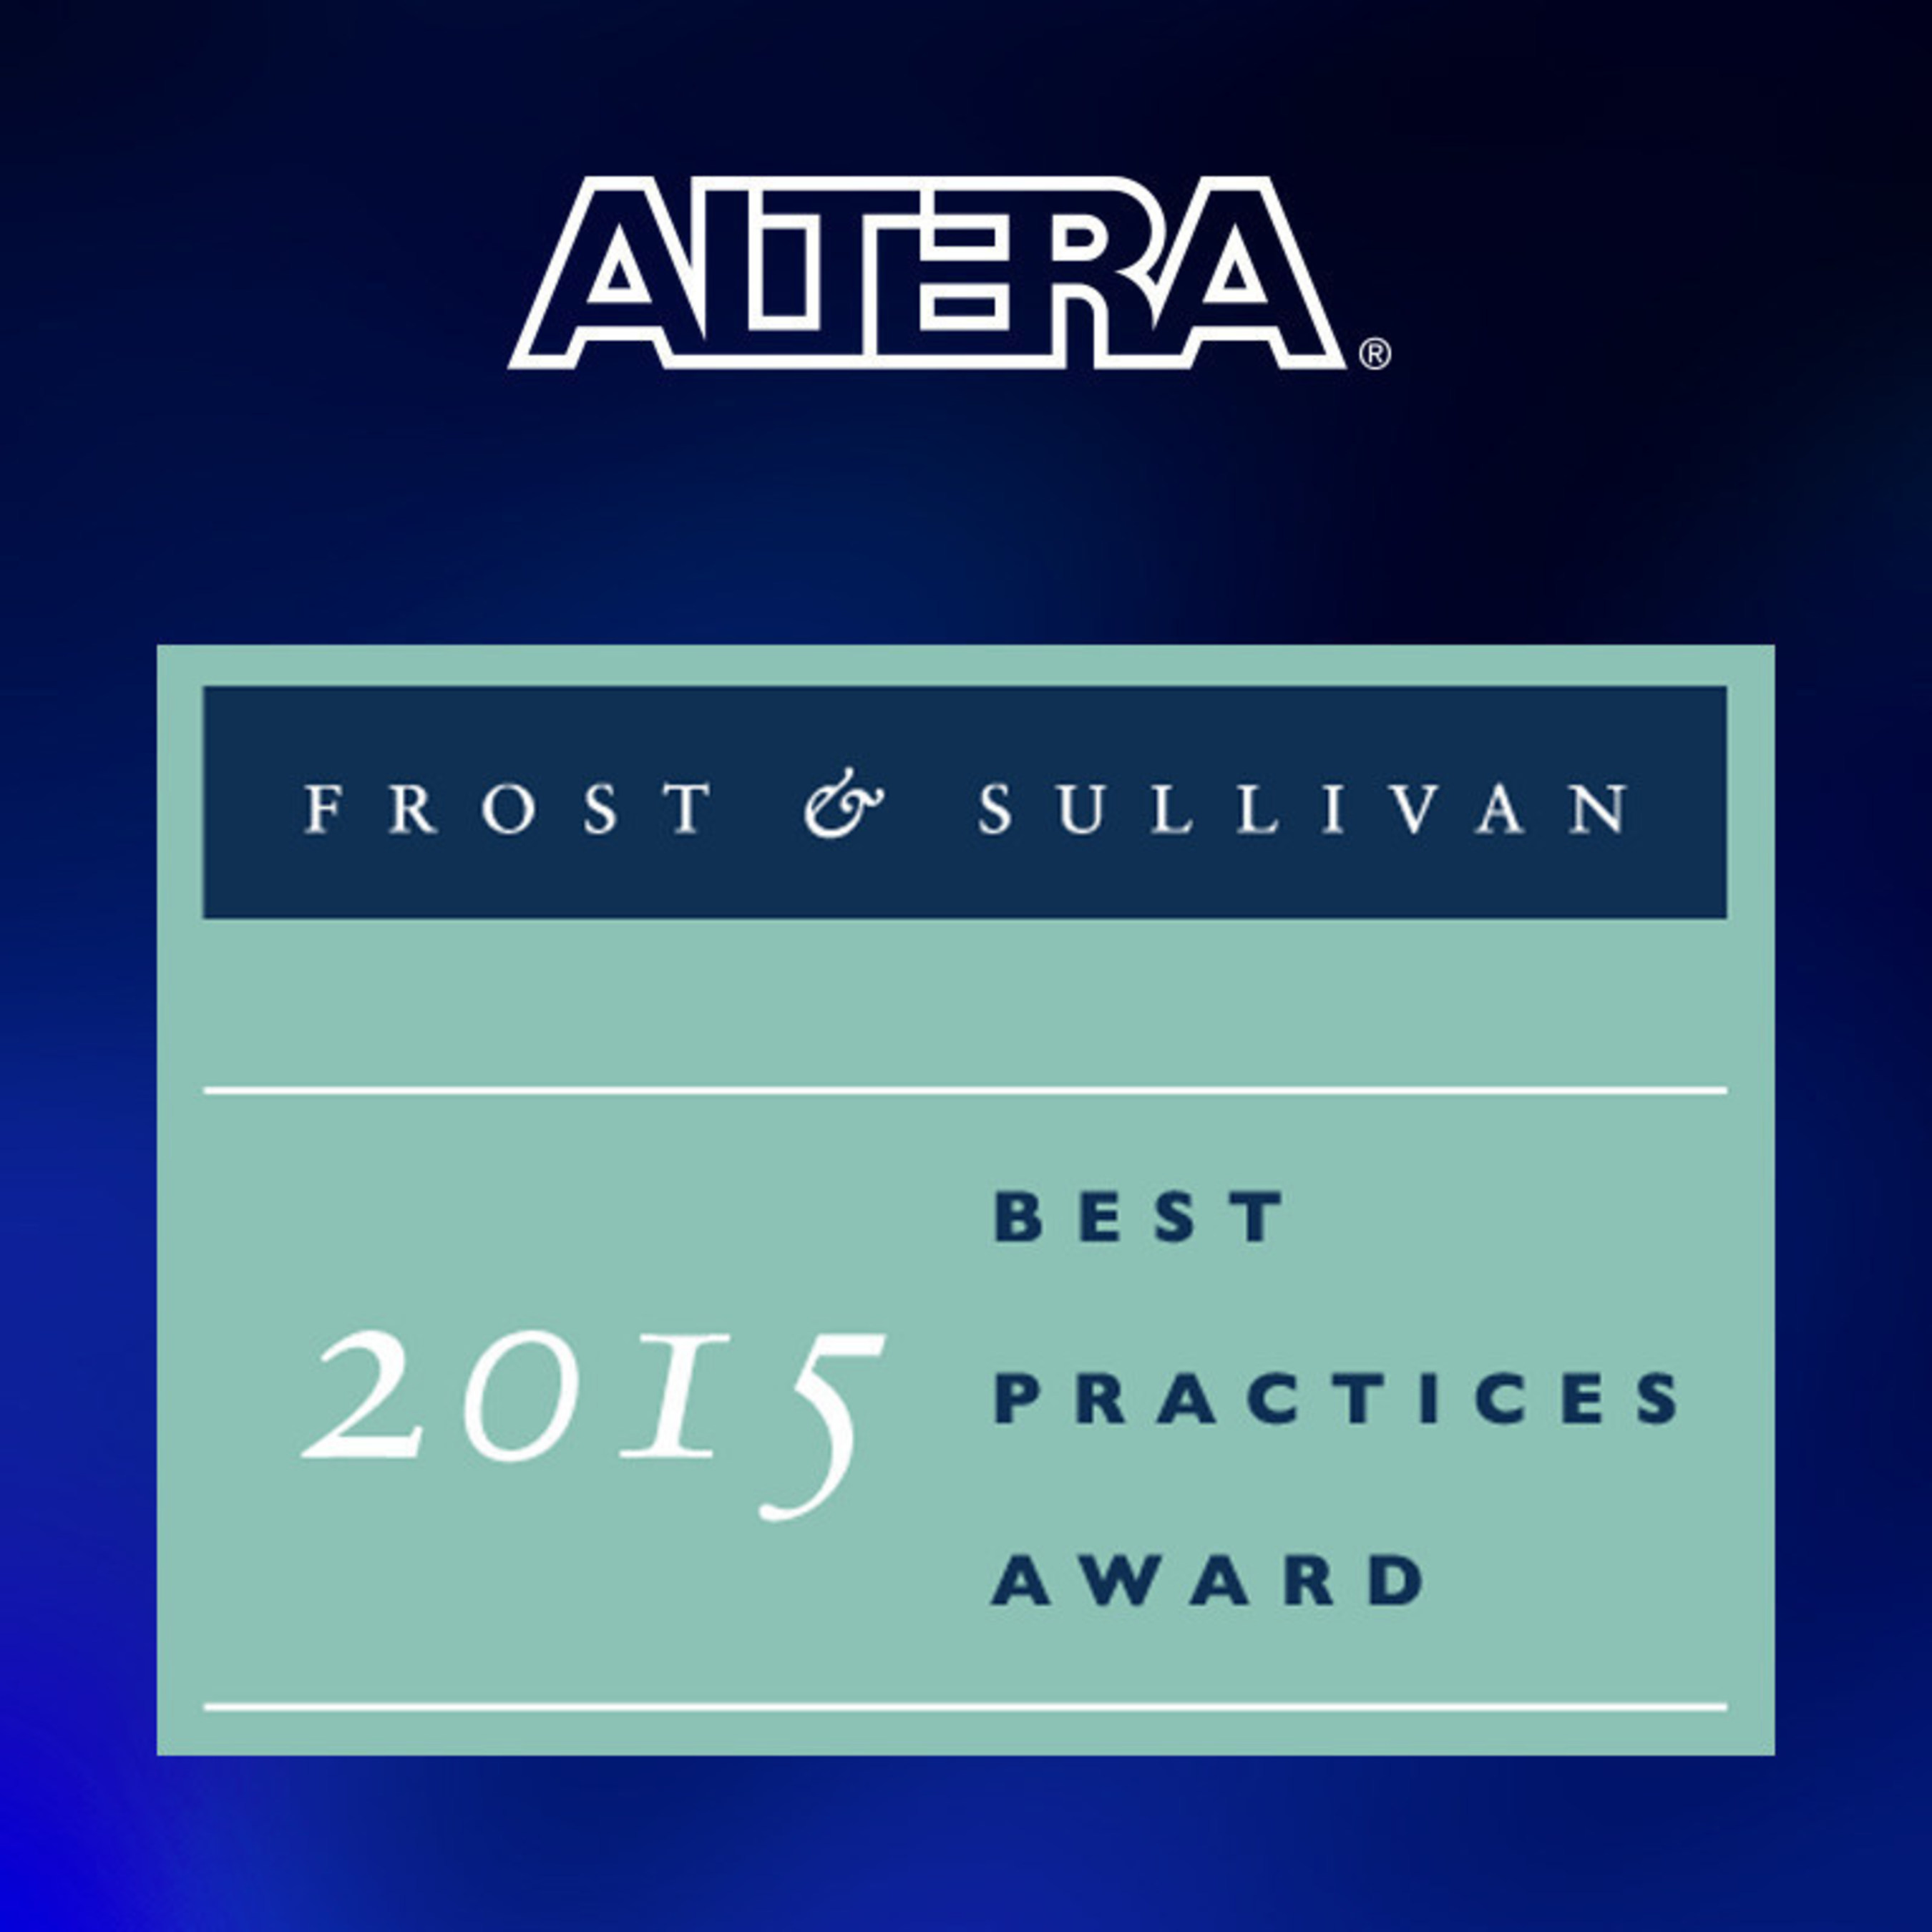 Altera recognized with Global FPGA Innovation Technology Leadership Award from analyst firm Frost & Sullivan. The award calls out the innovation behind Altera's implementation of hard-floating point operators in the digital signal processing blocks in its Arria 10 FPGAs. With hardened floating point, Altera FPGAs and SoCs offer a performance and power efficiency advantage over microprocessors and graphic processor units (GPUs) in an expanded range of applications.